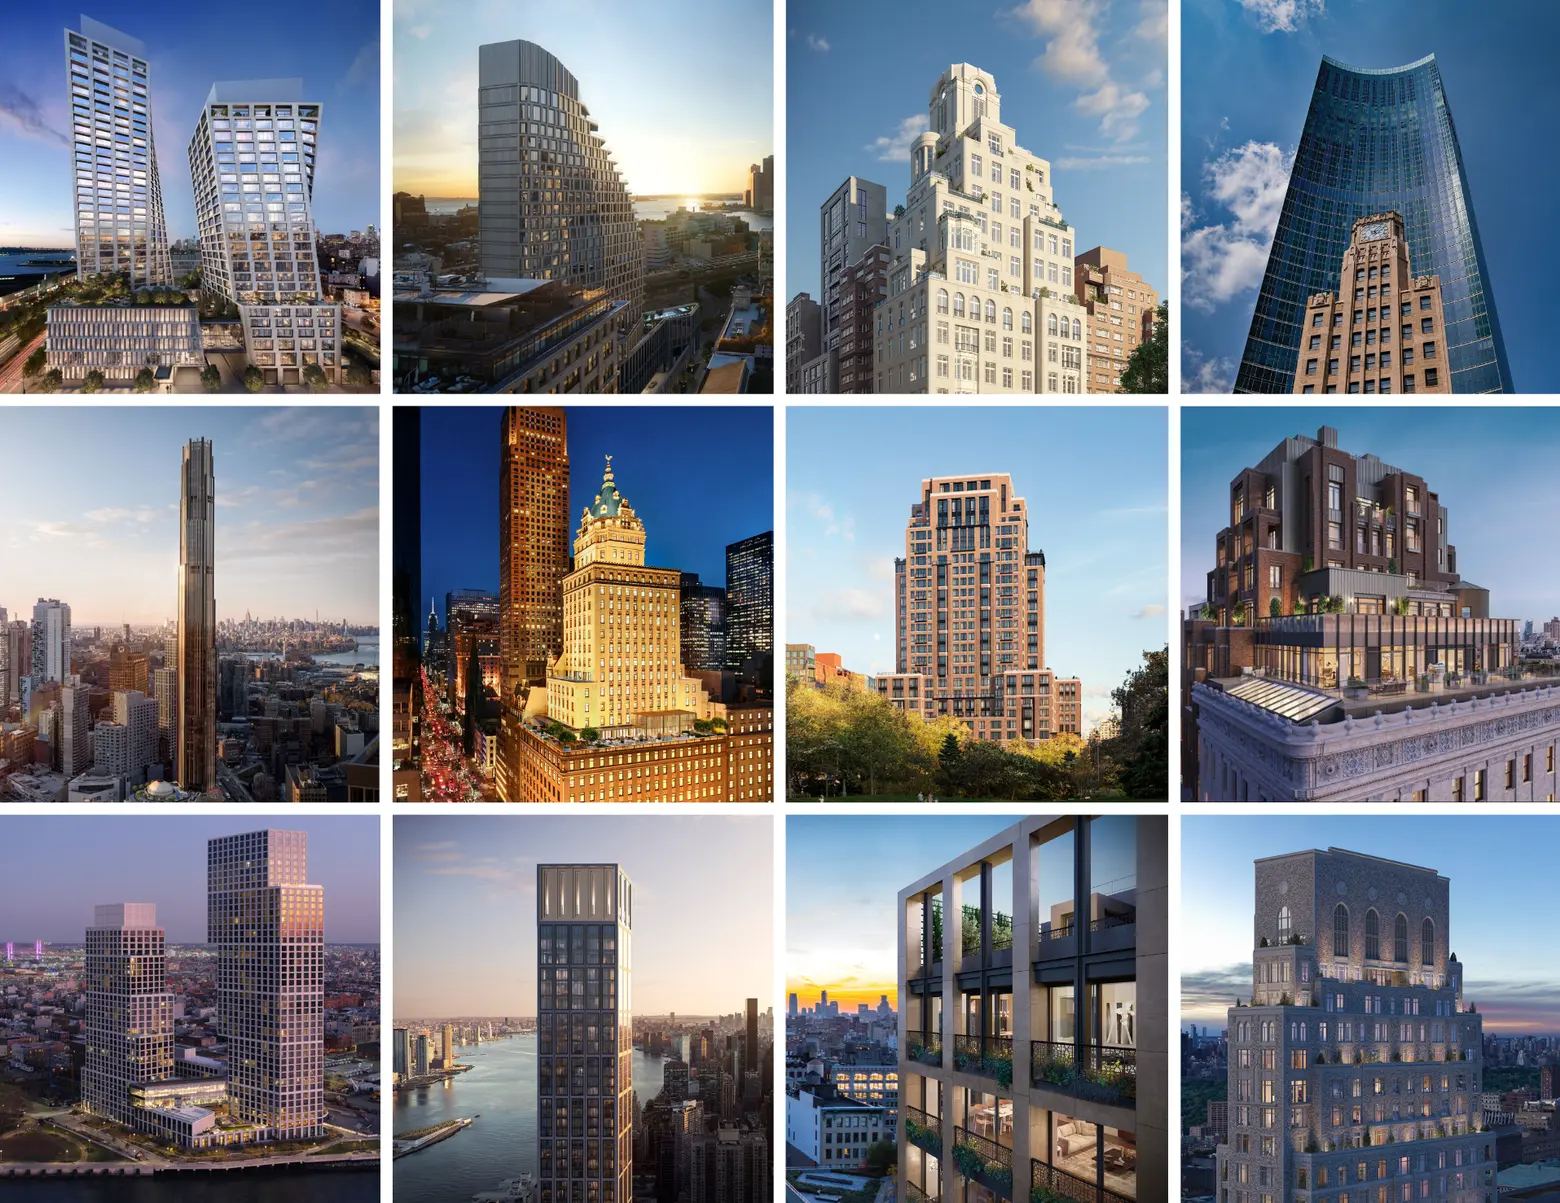 Vote for 6sqft’s 2022 Building of the Year!